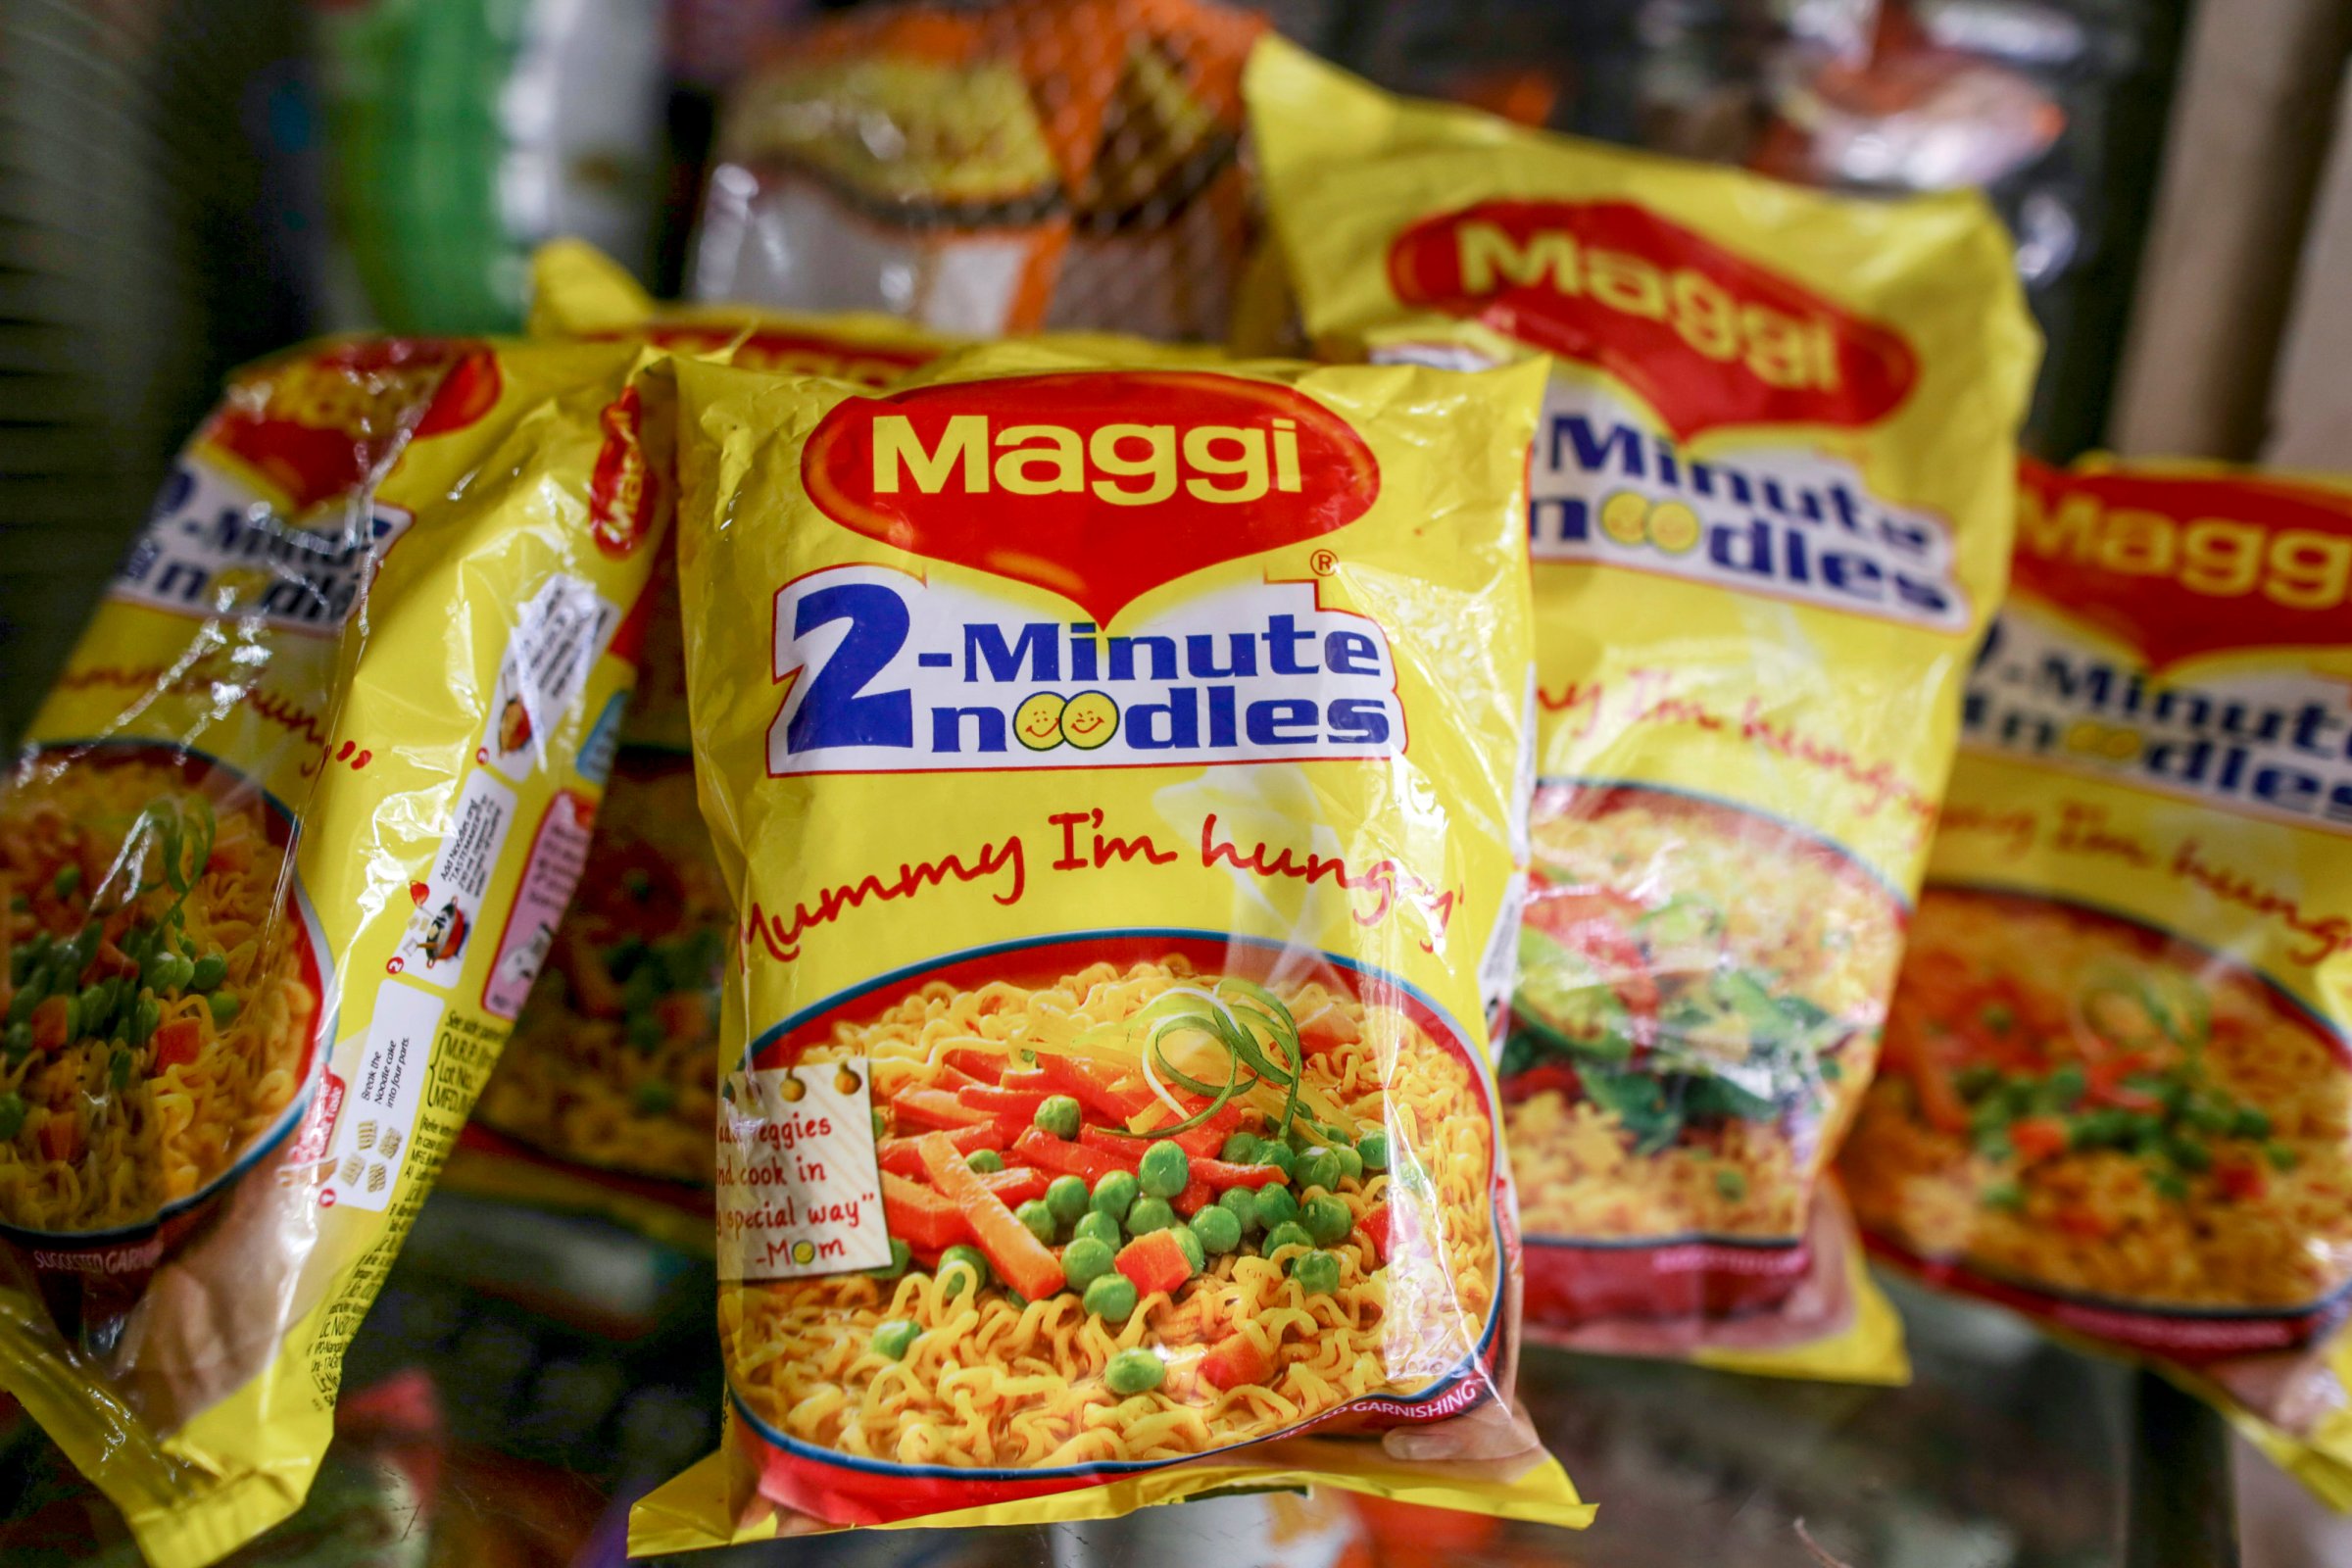 Maggi Instant Noodles On Sale As Nestle India Ltd. Face Prospect Of Trial Over Lead Levels